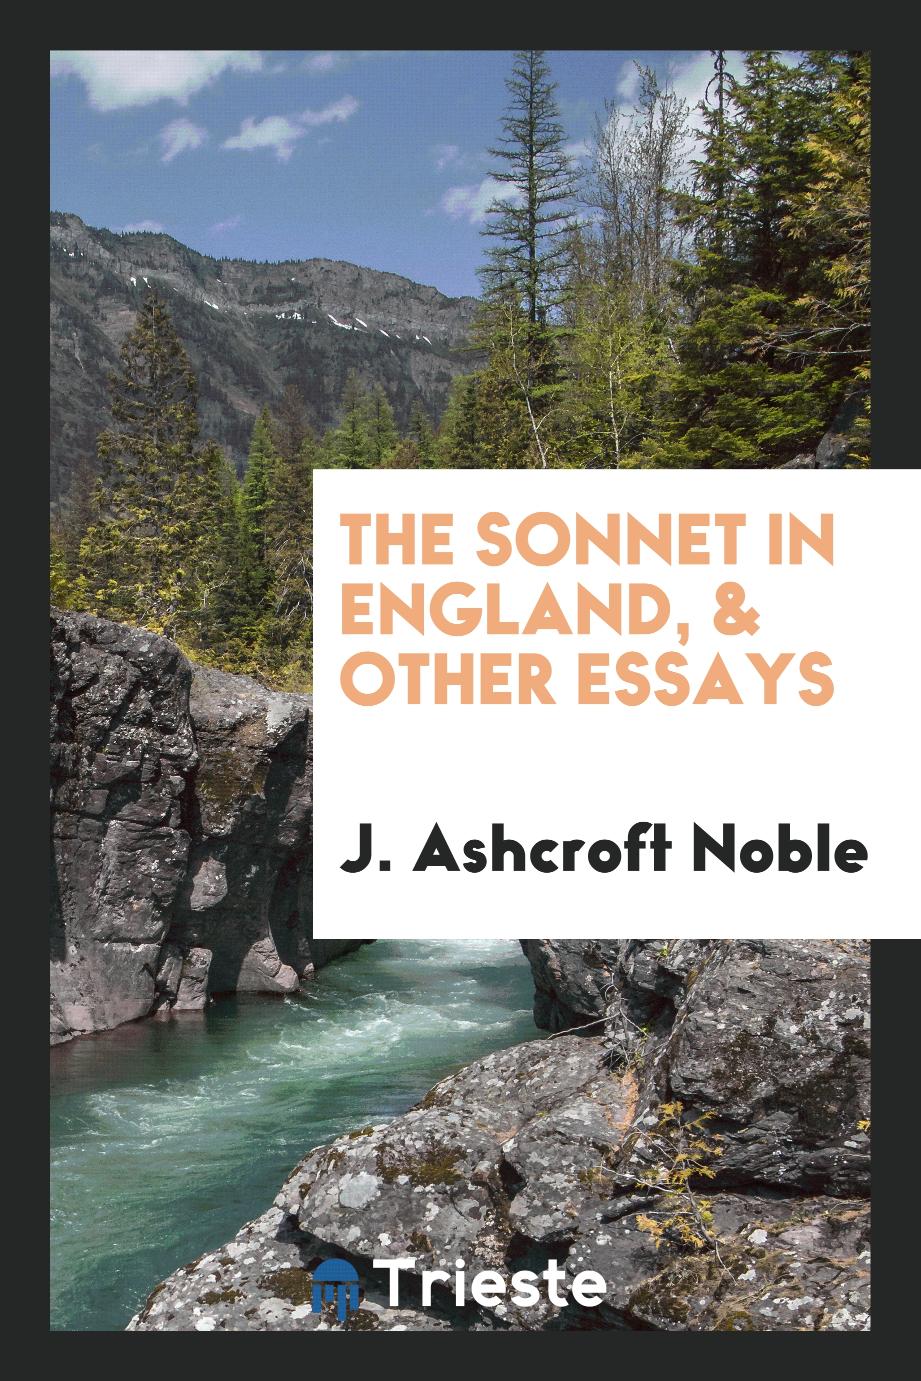 The sonnet in England, & other essays